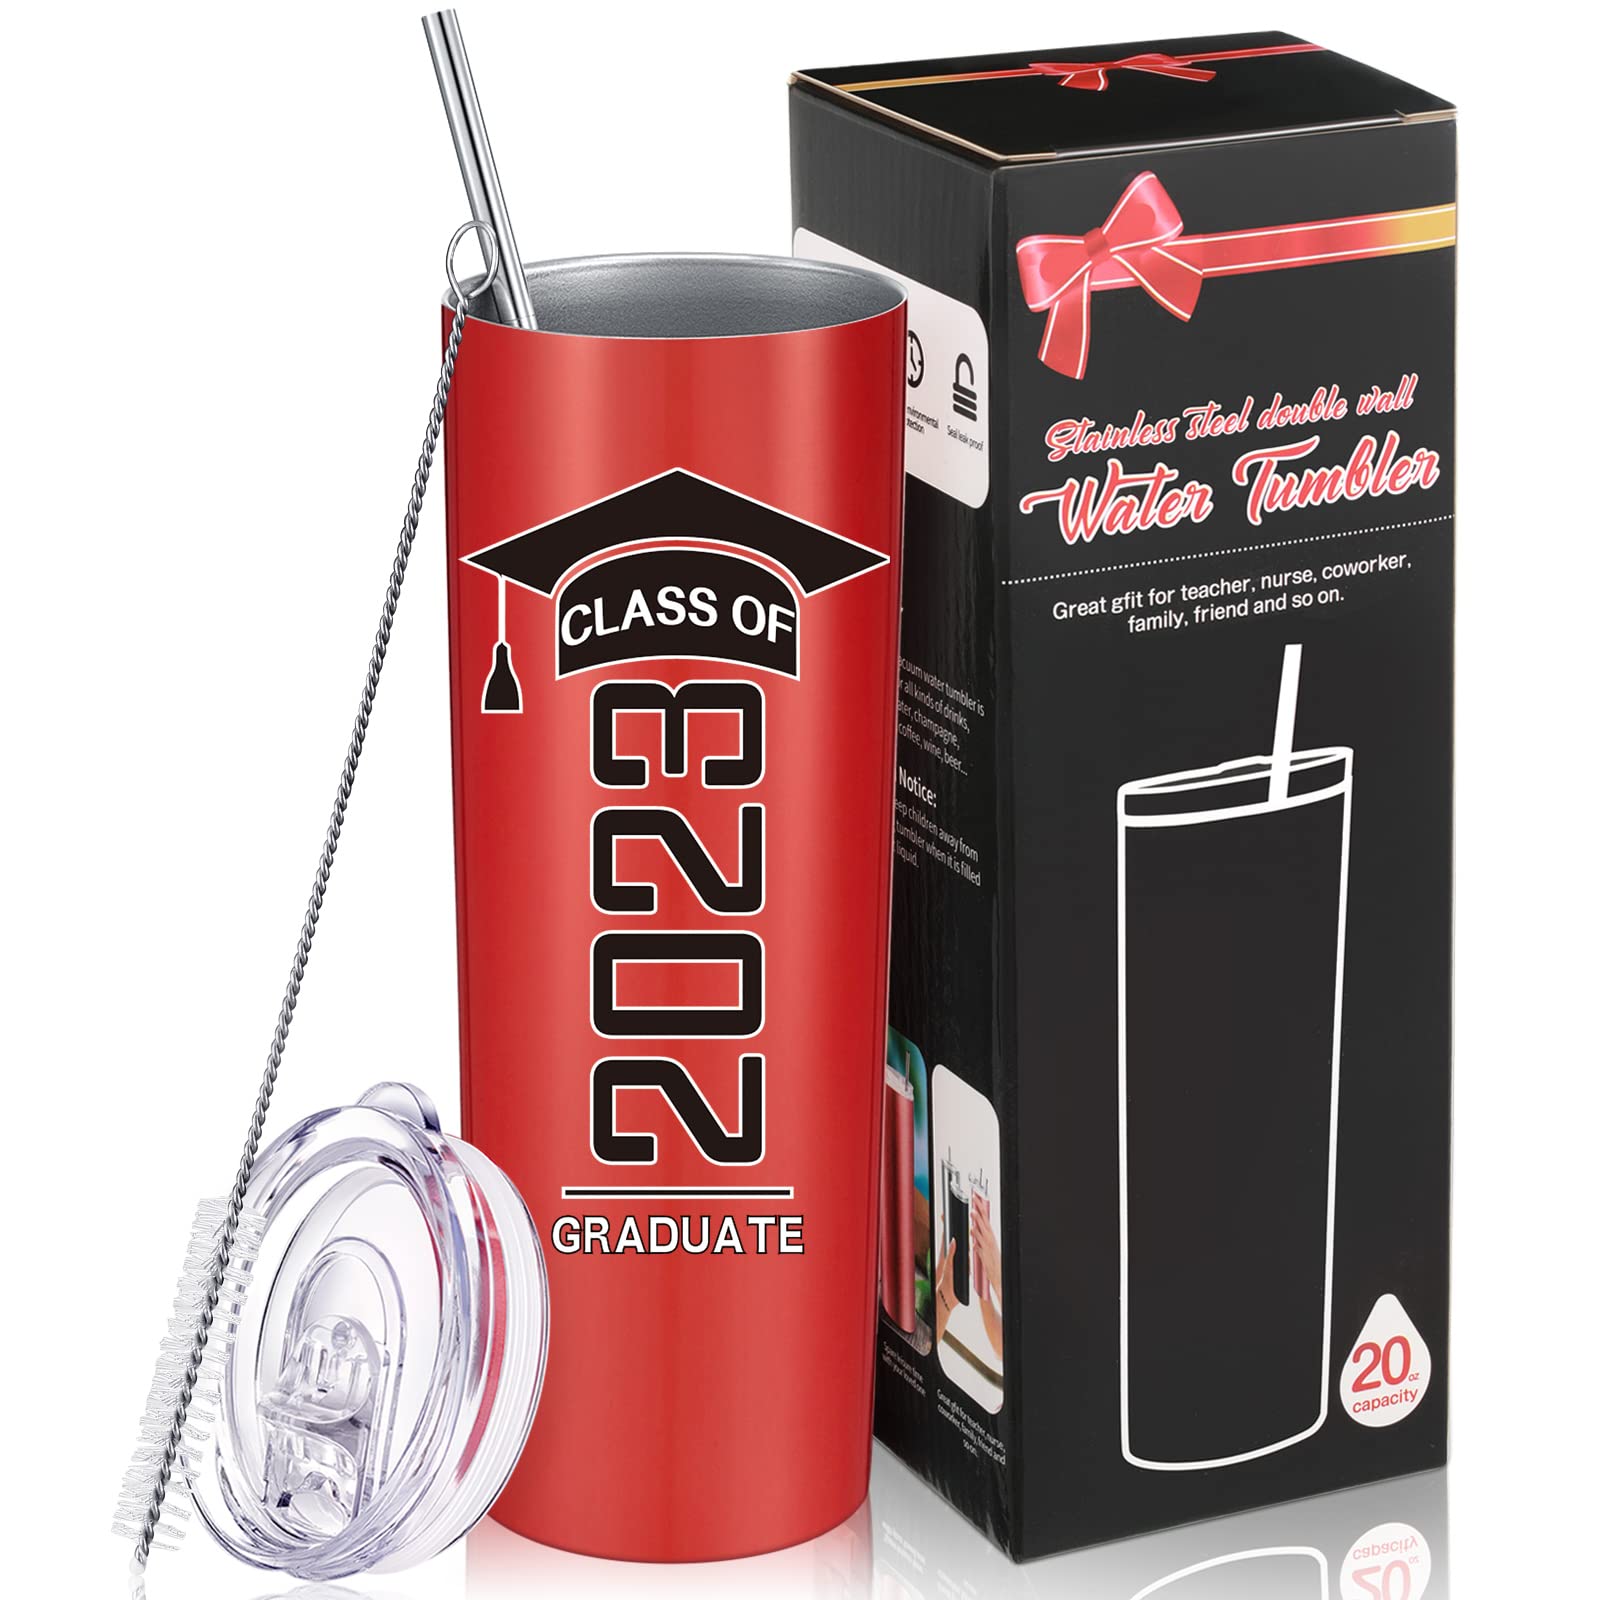 Class of 2023 Graduate Travel Mug for Her Him, Inspirational Graduation Gifts for College High School Student, 20 oz Insulated Water Tumbler with Straw Lid Brush (Red, Class of 2023)